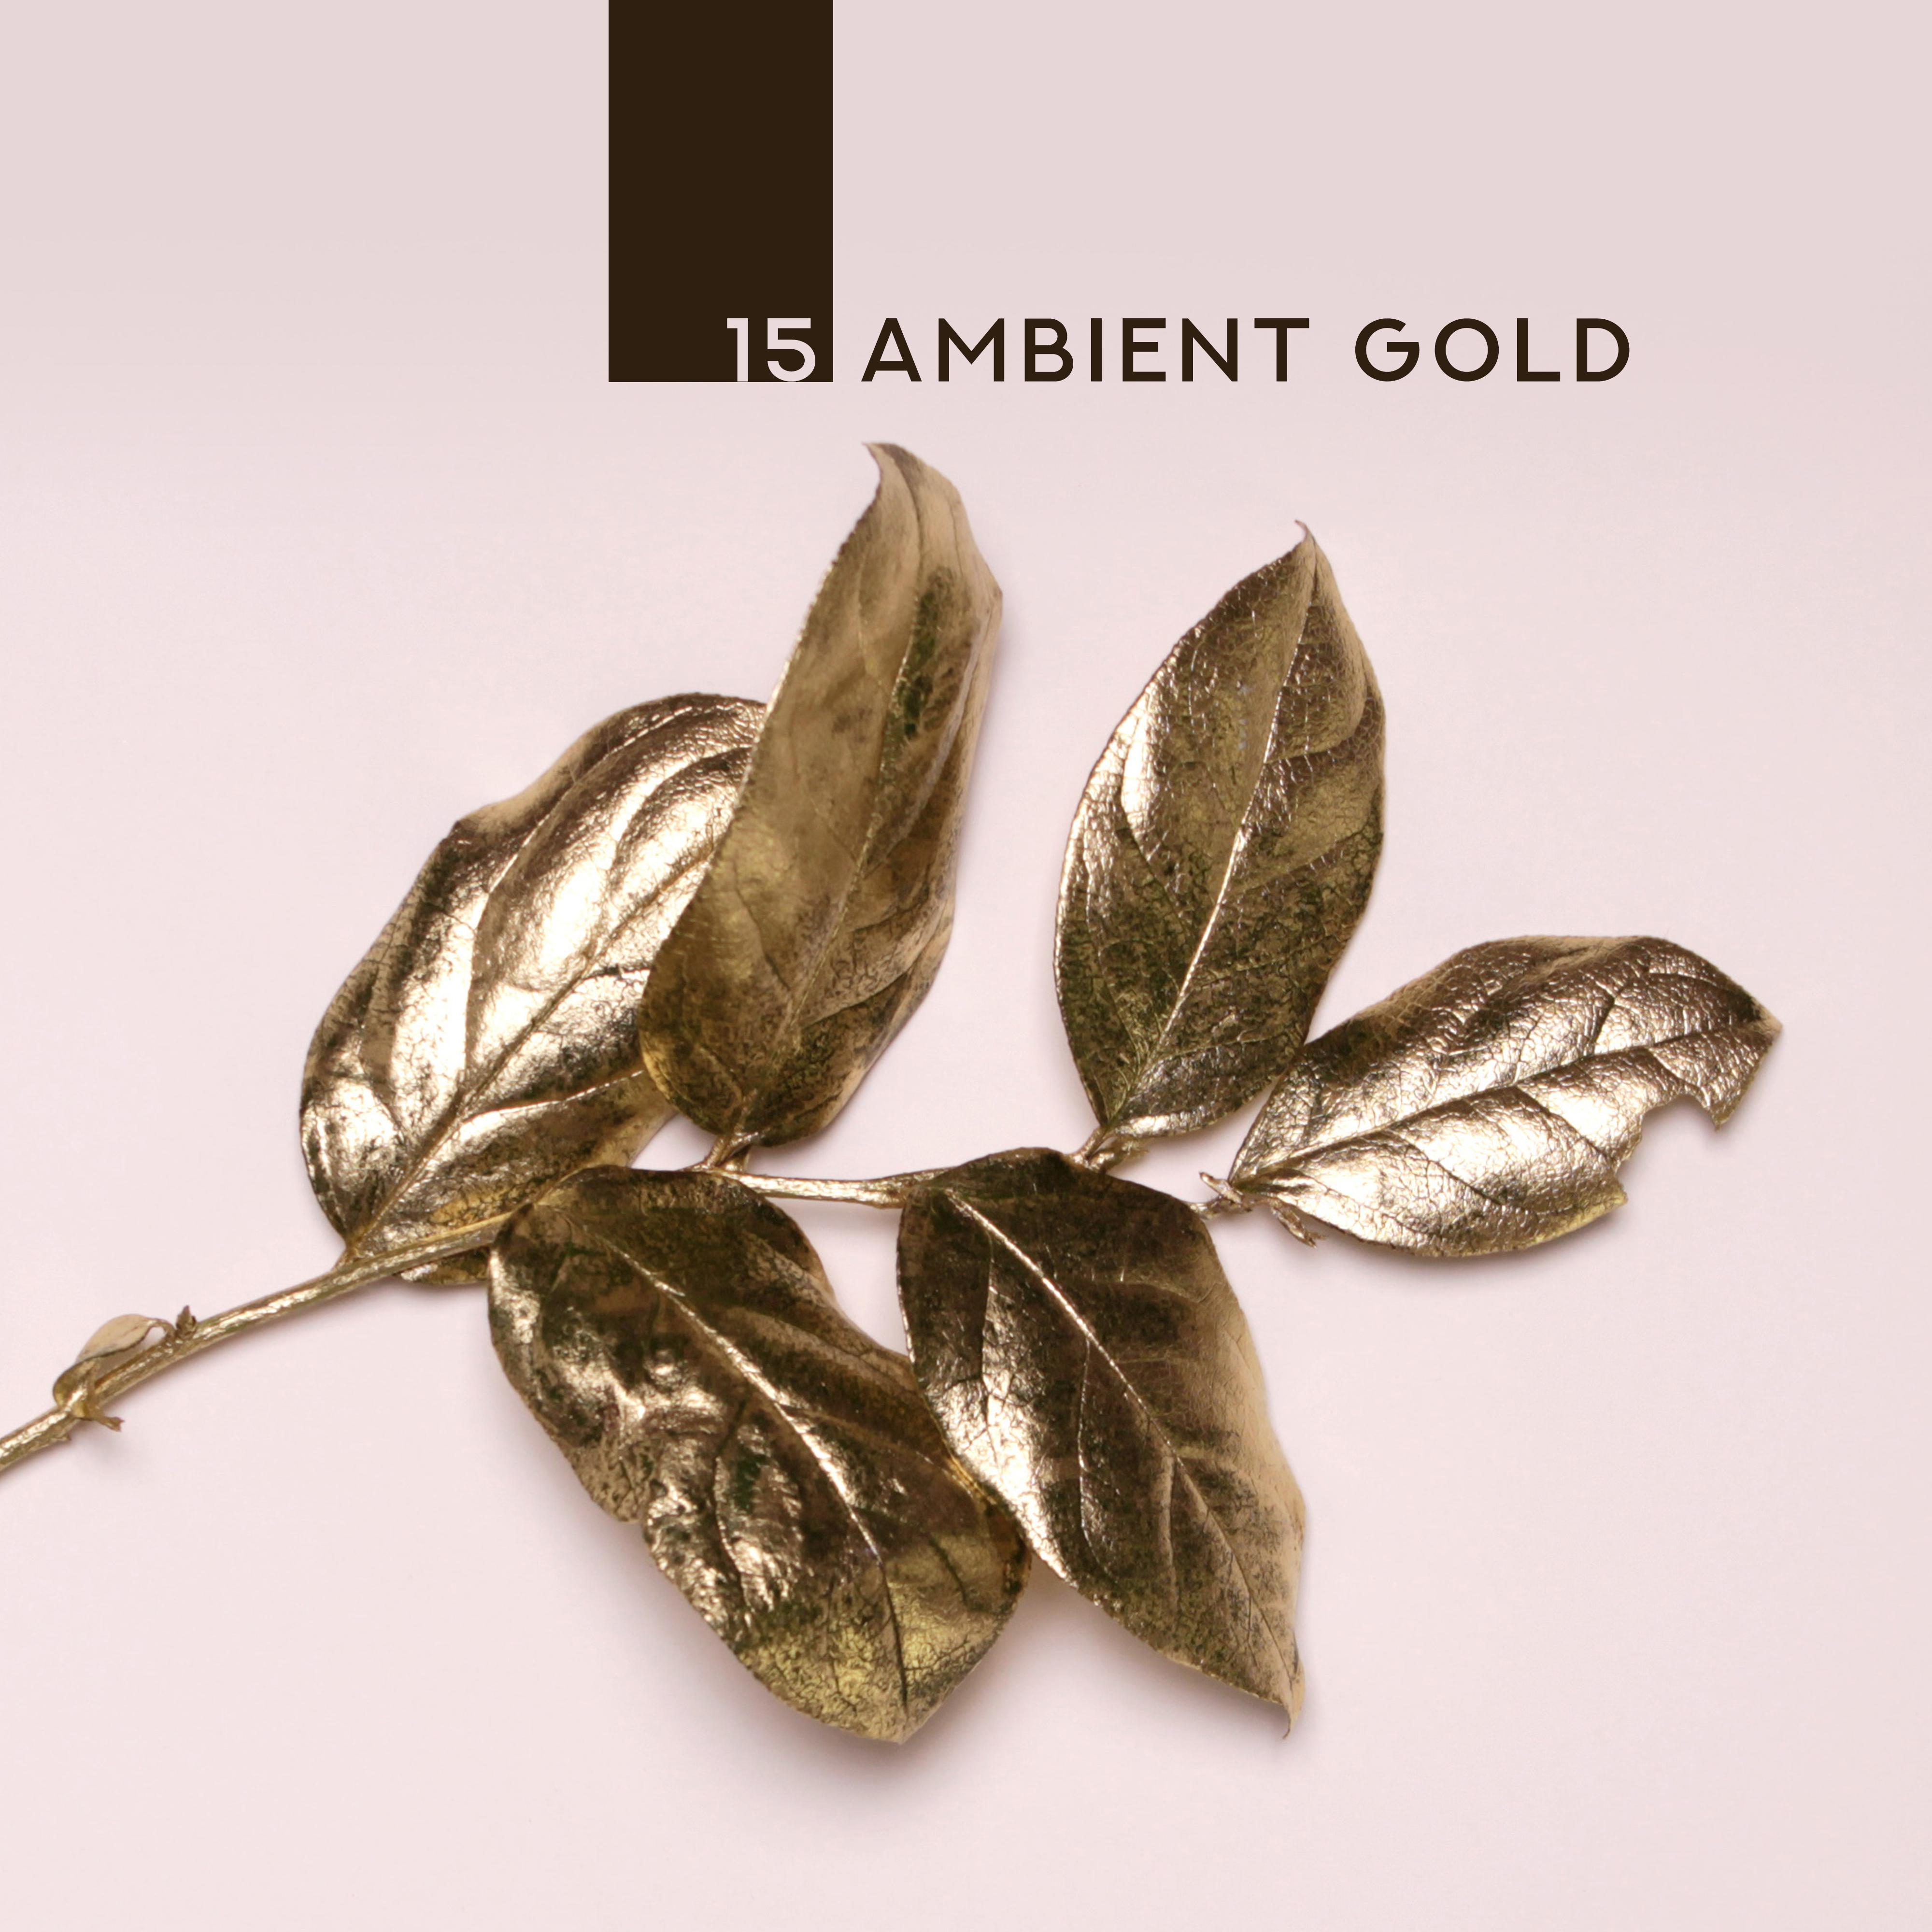 15 Ambient Gold